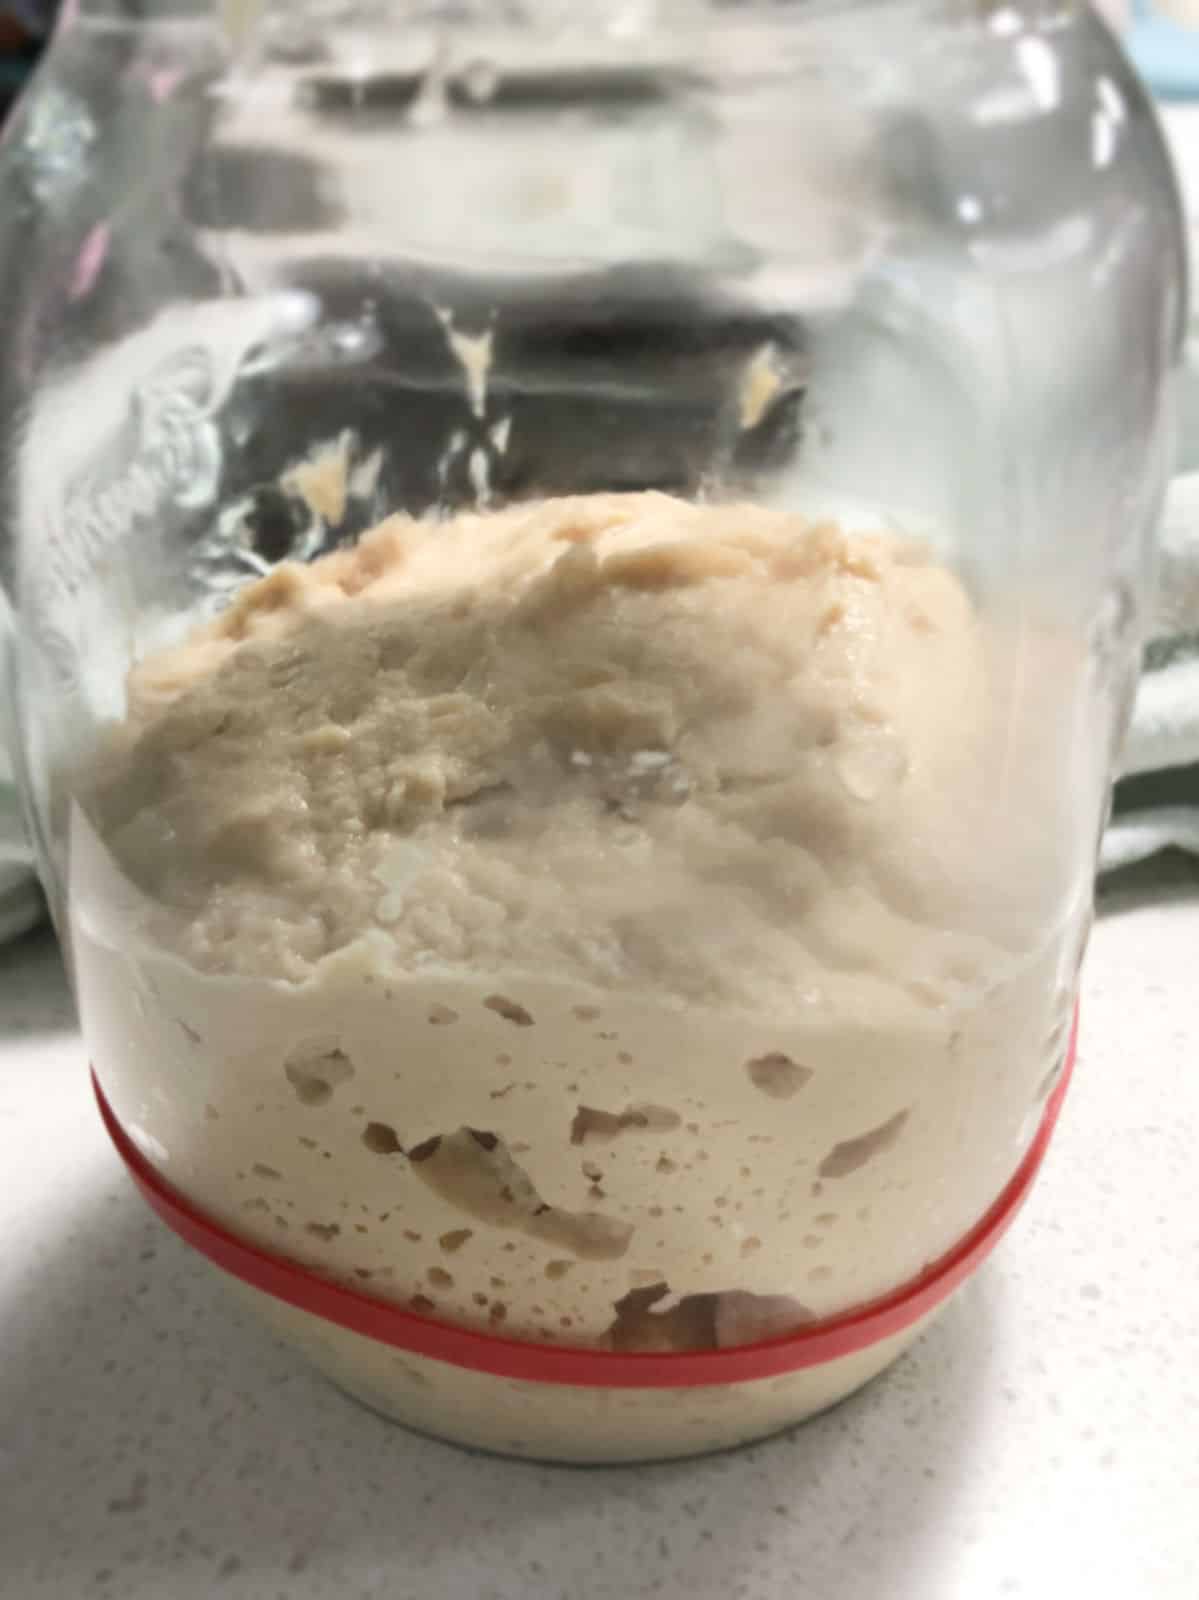 Day 4, feed 2 of the sourdough starter.